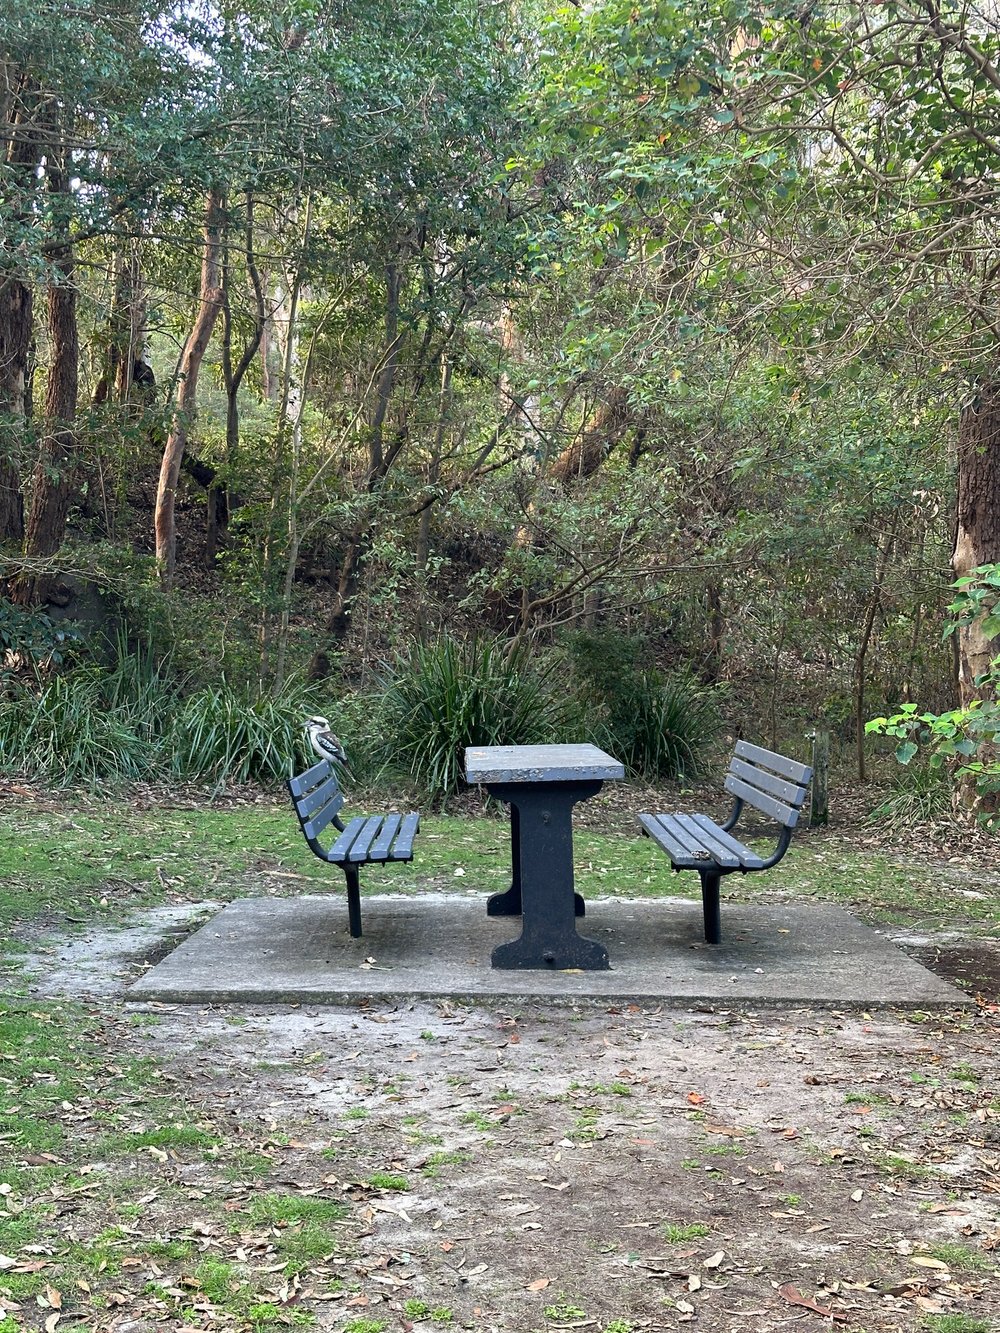 One of the picnic tables near The Castle